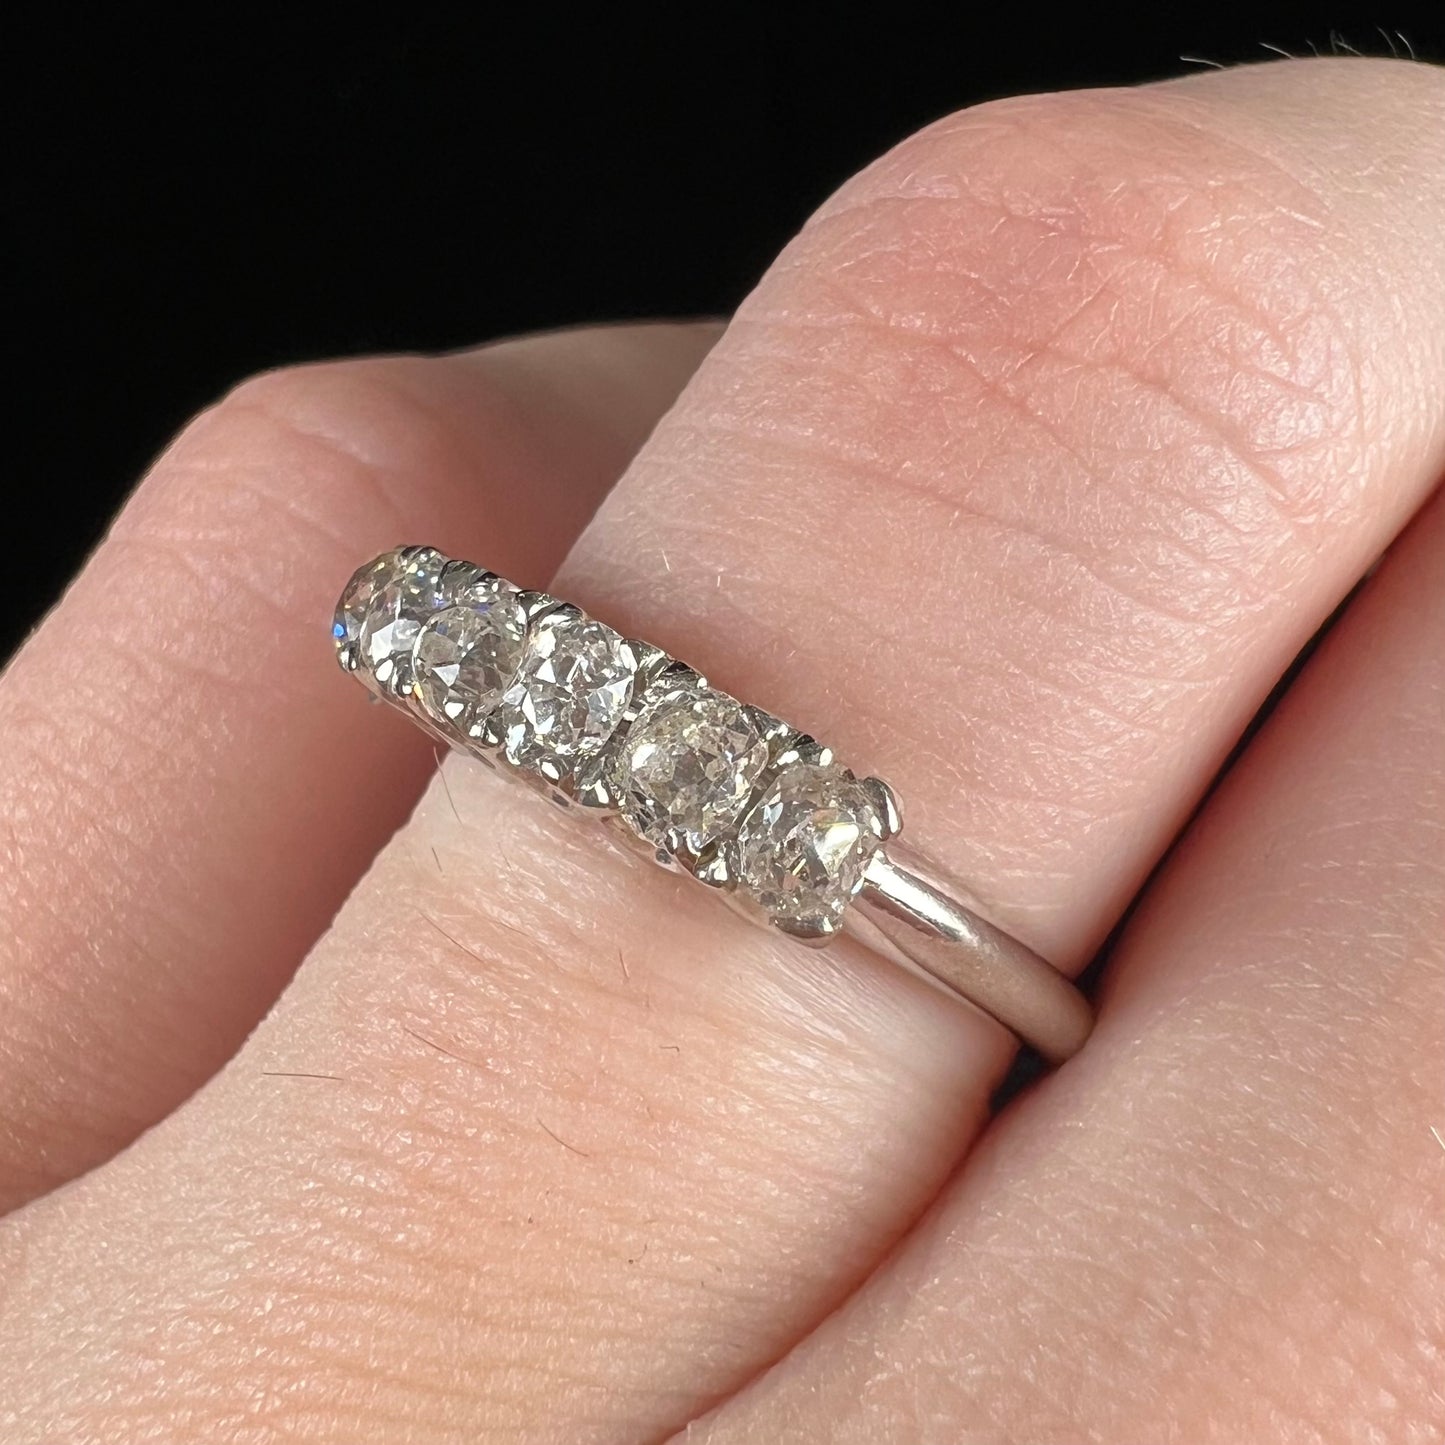 An antique white gold diamond wedding band set with six old mine cut natural diamonds.